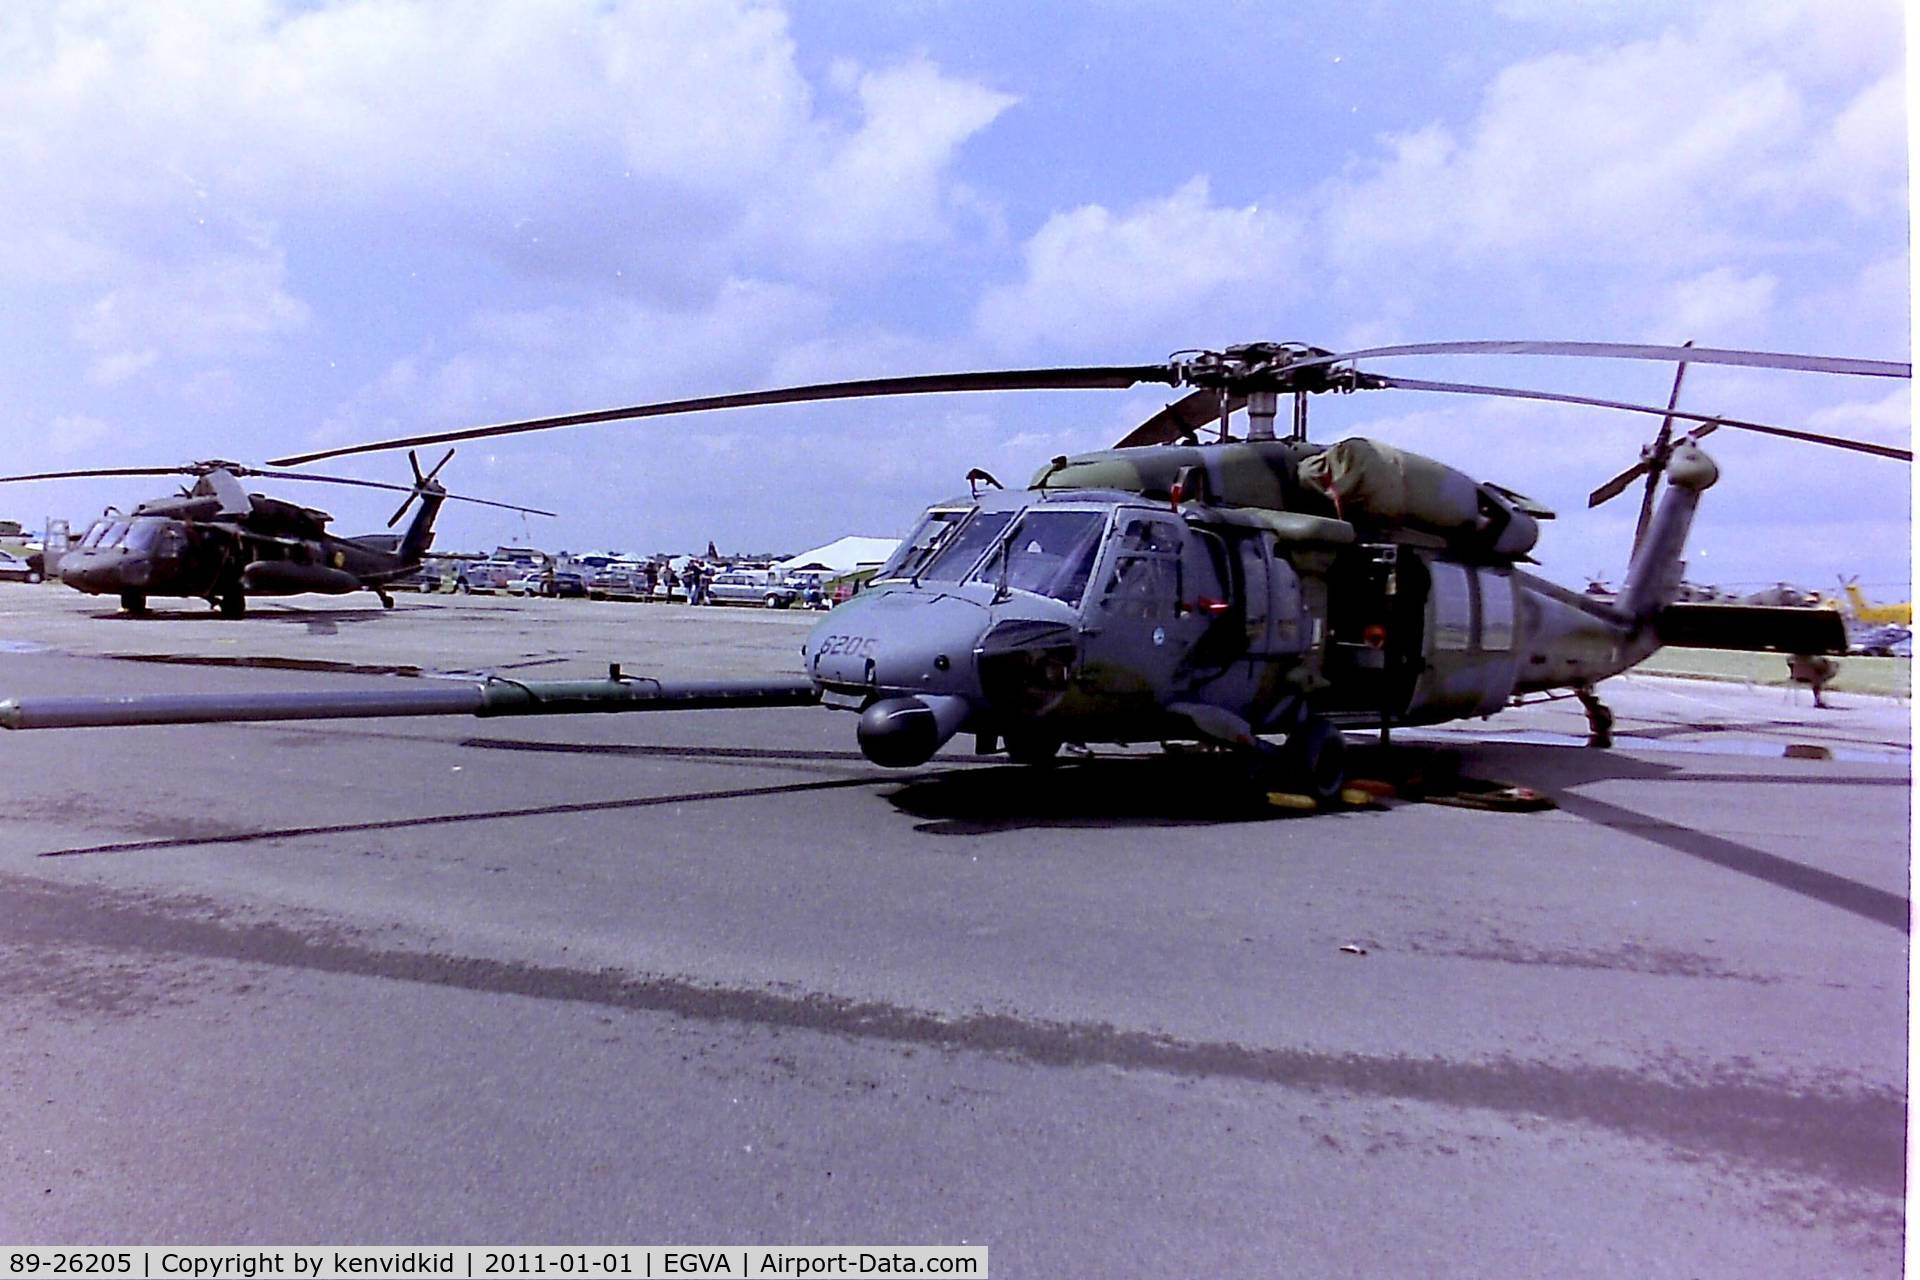 89-26205, 1989 Sikorsky HH-60G Pave Hawk C/N 70-1434, At RIAT 1993, scanned from negative.